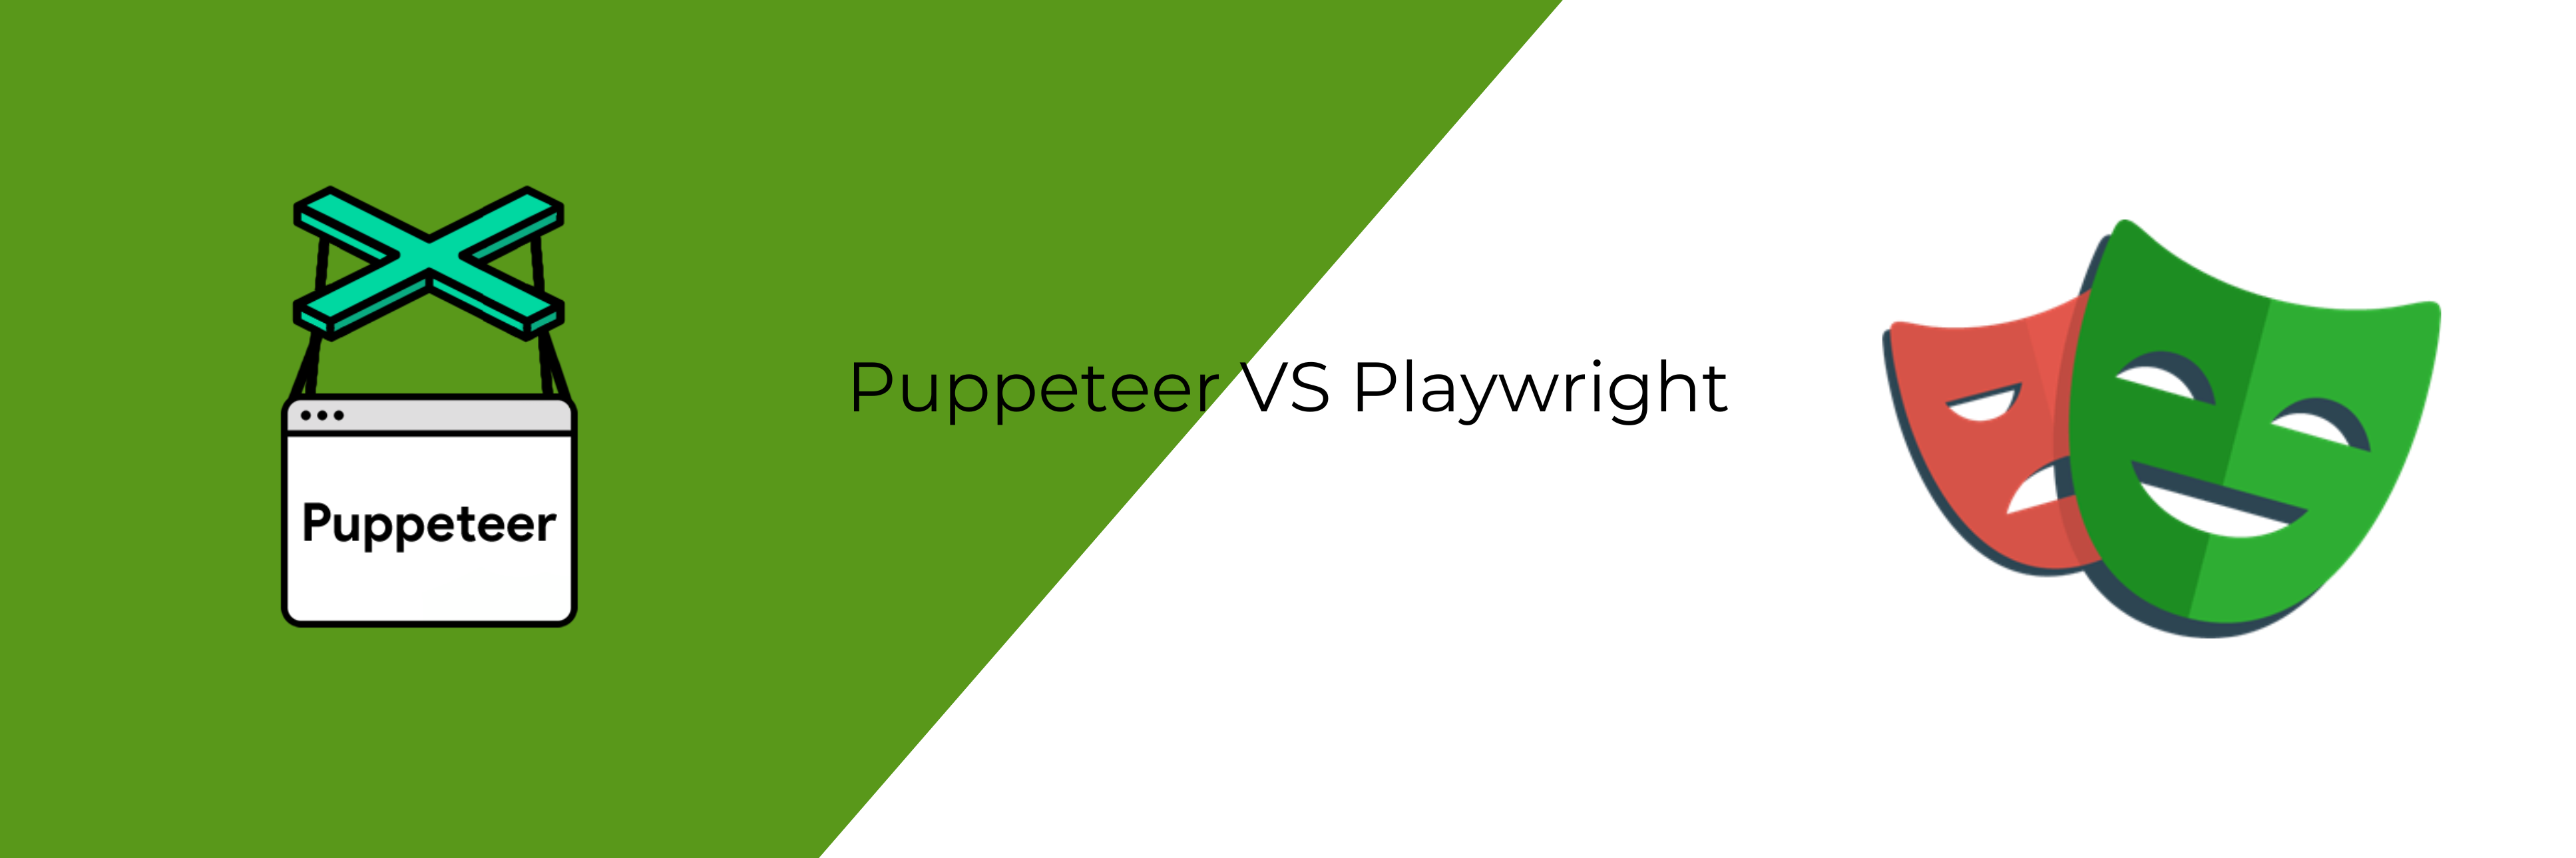 the difference between puppeteer and playwright